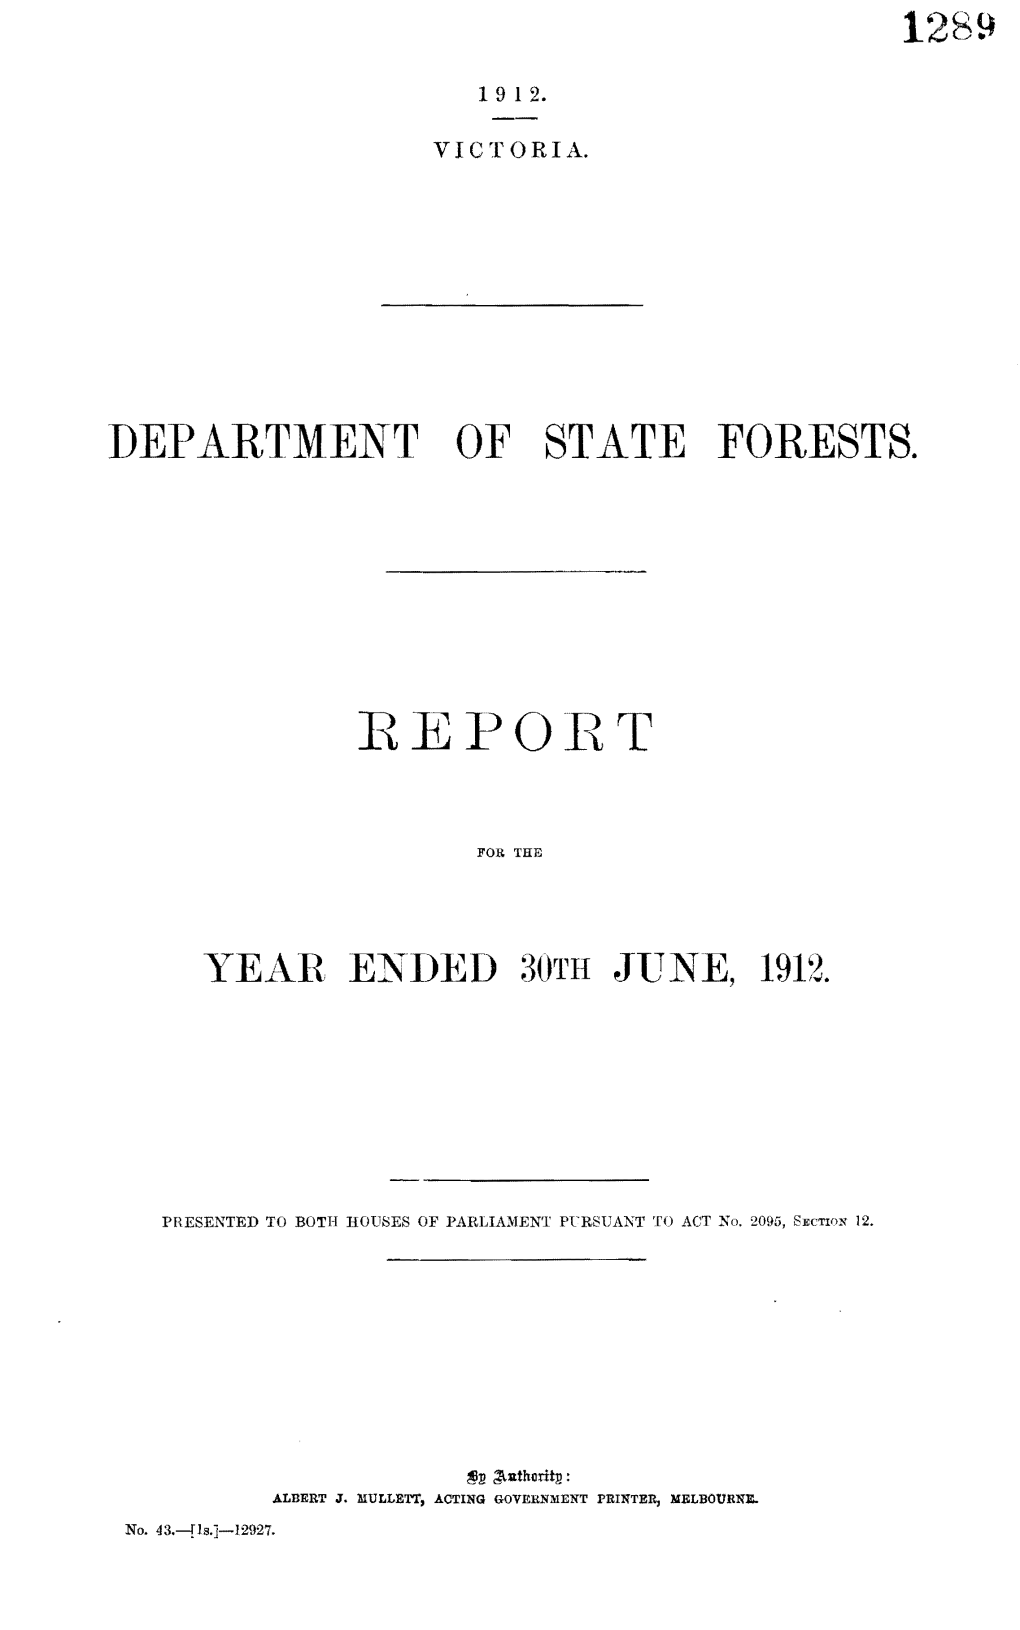 Department of State Forest&